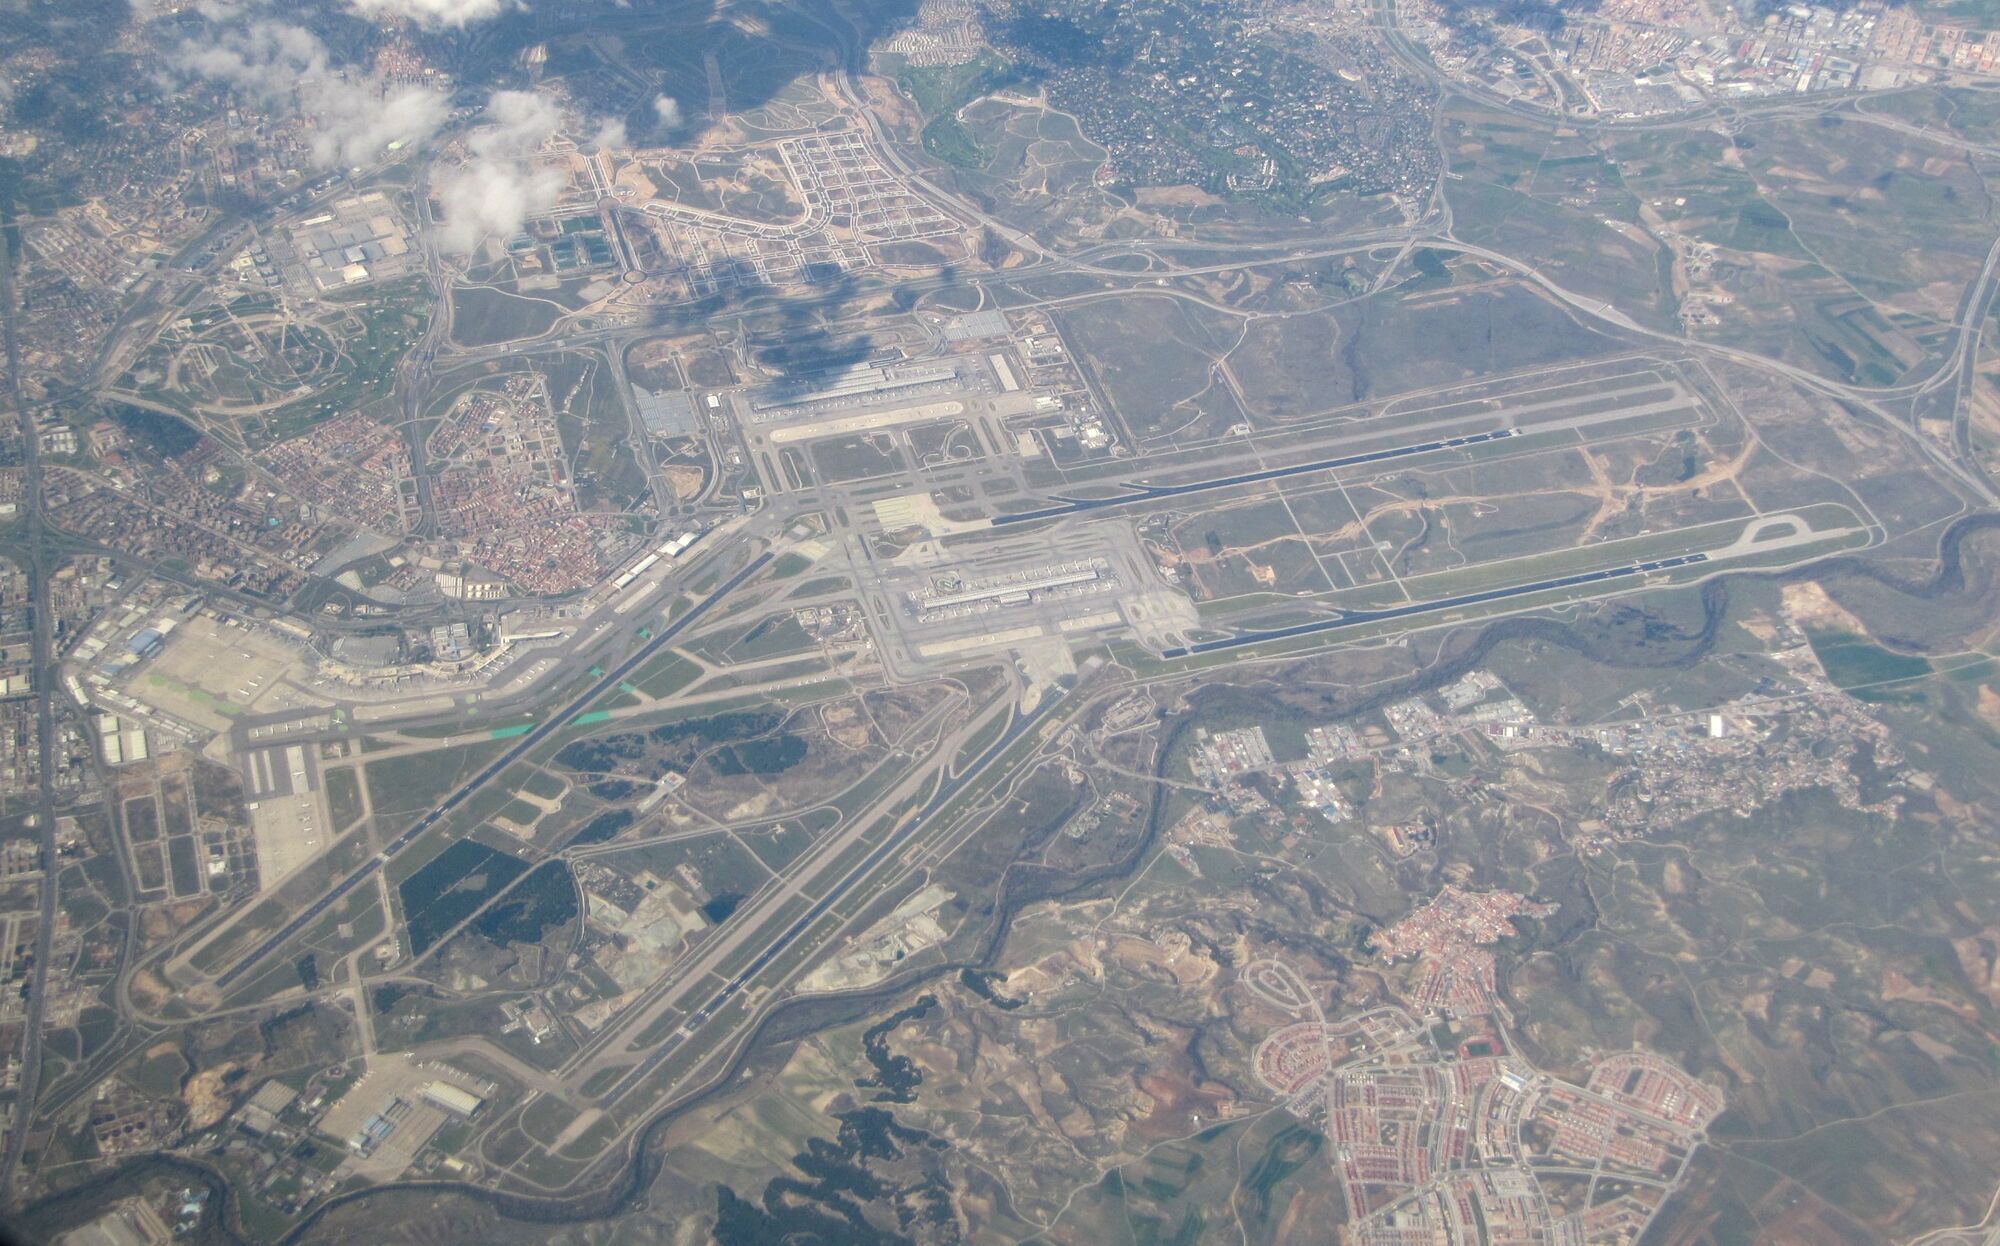 Top 5 fun facts about Spain's busiest airport